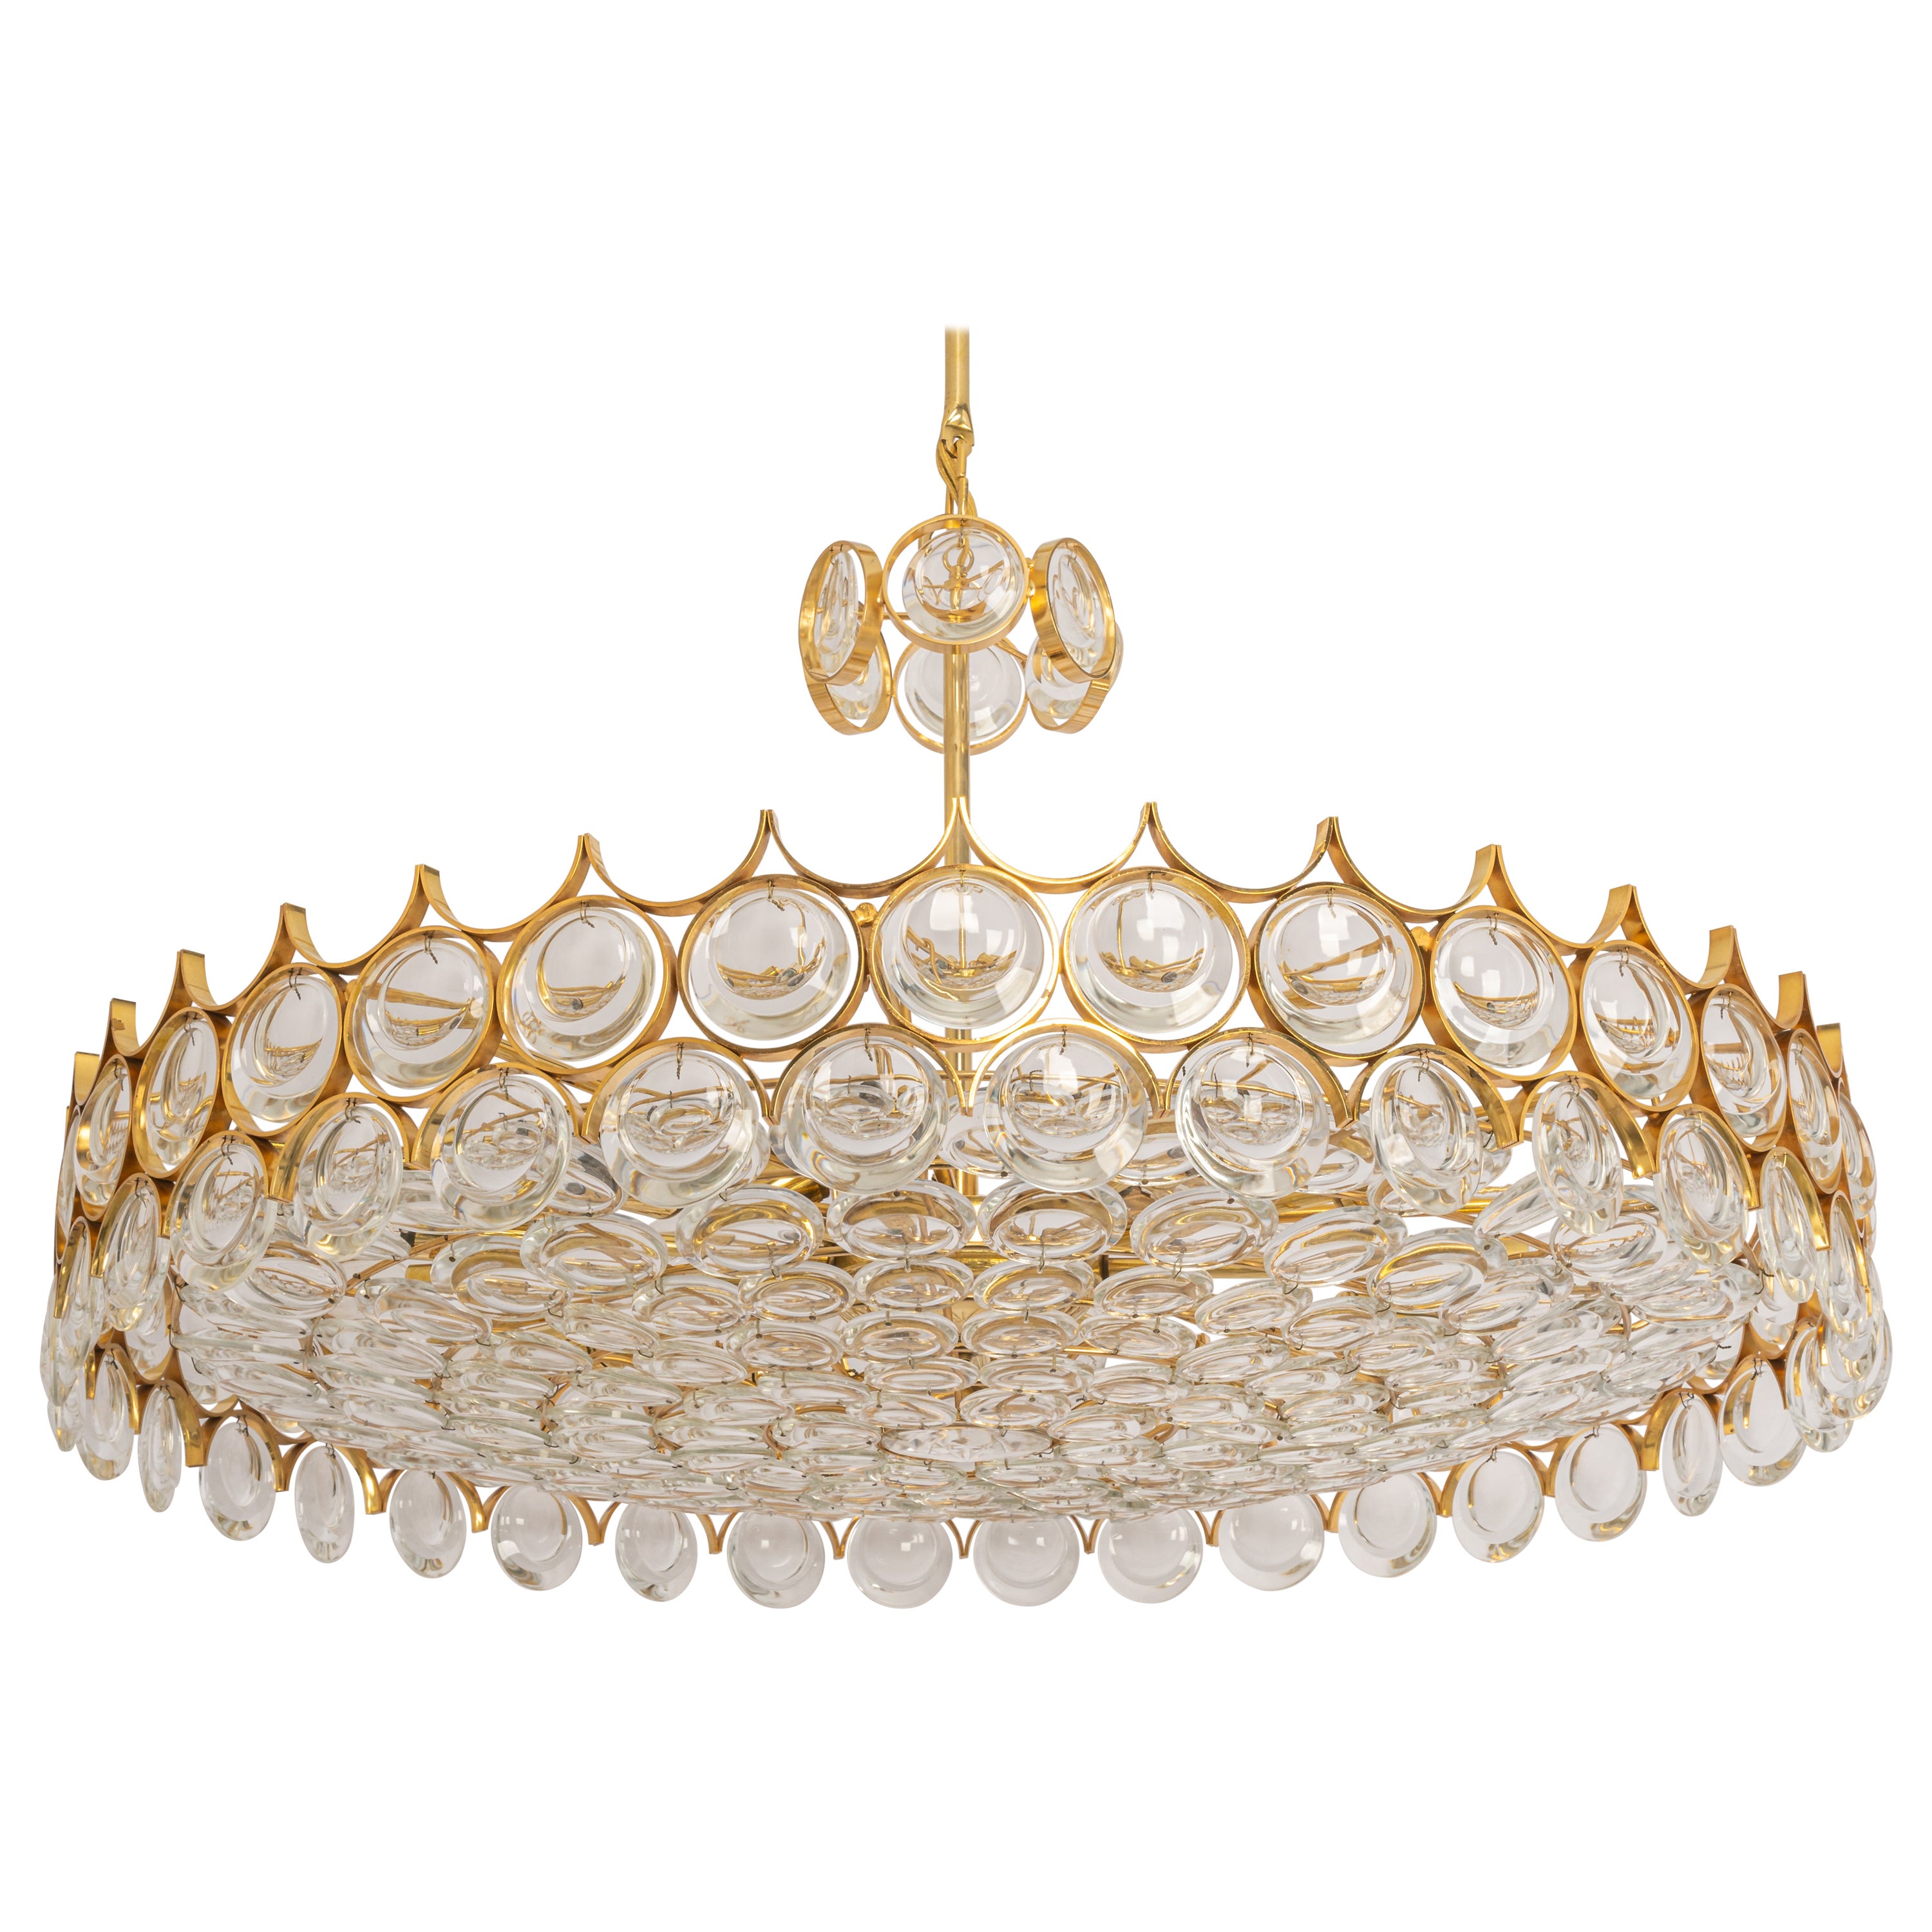 Huge Gilt Brass and Crystal Chandelier, Sciolari Design by Palwa, Germany, 1970s For Sale